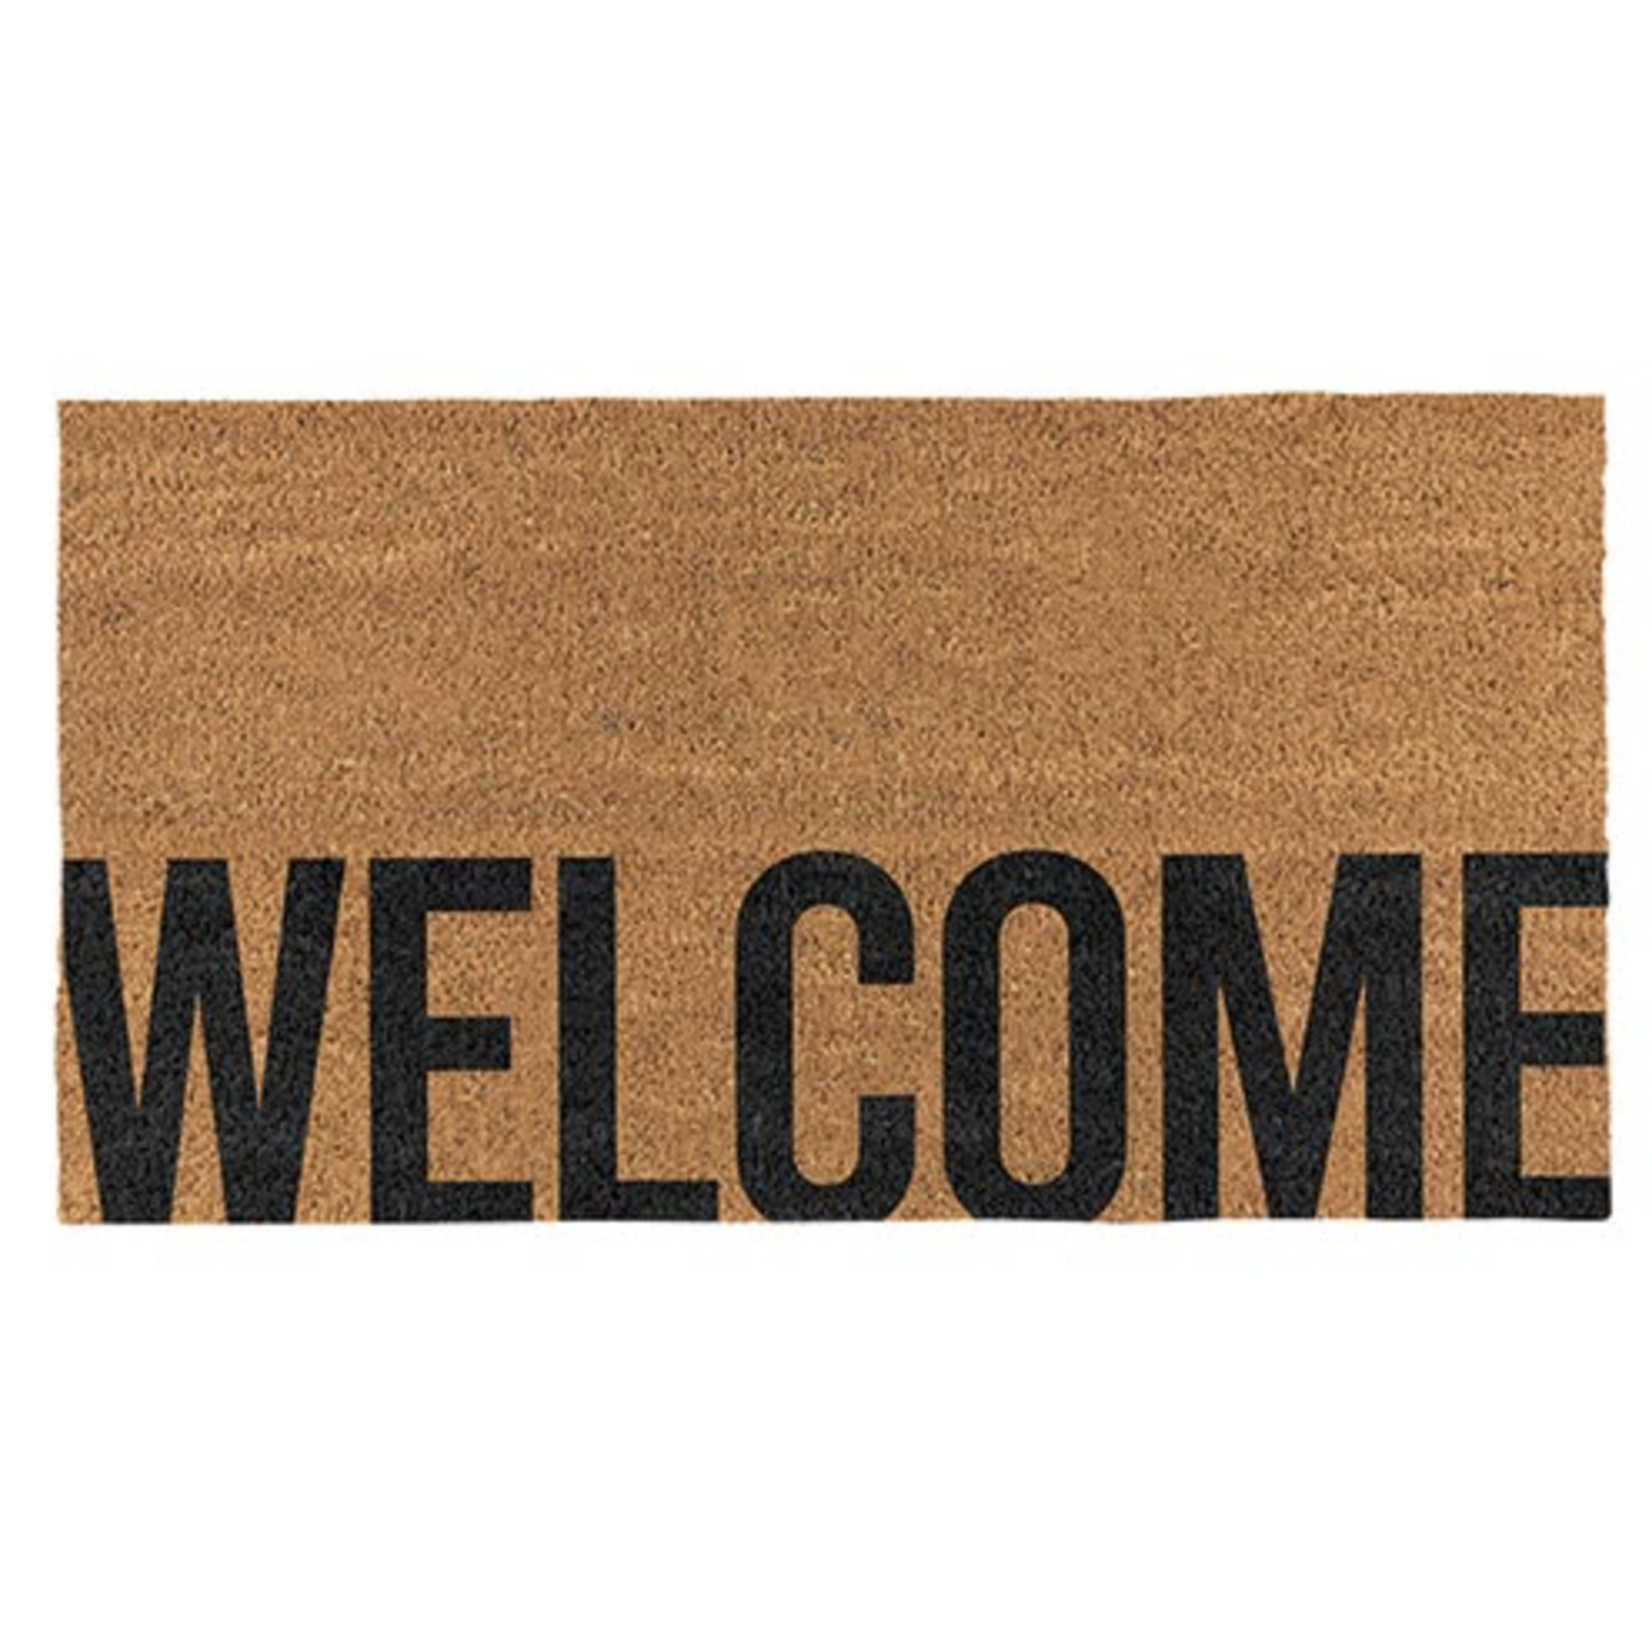 Outside The Box 30x16 "Welcome" Doormat